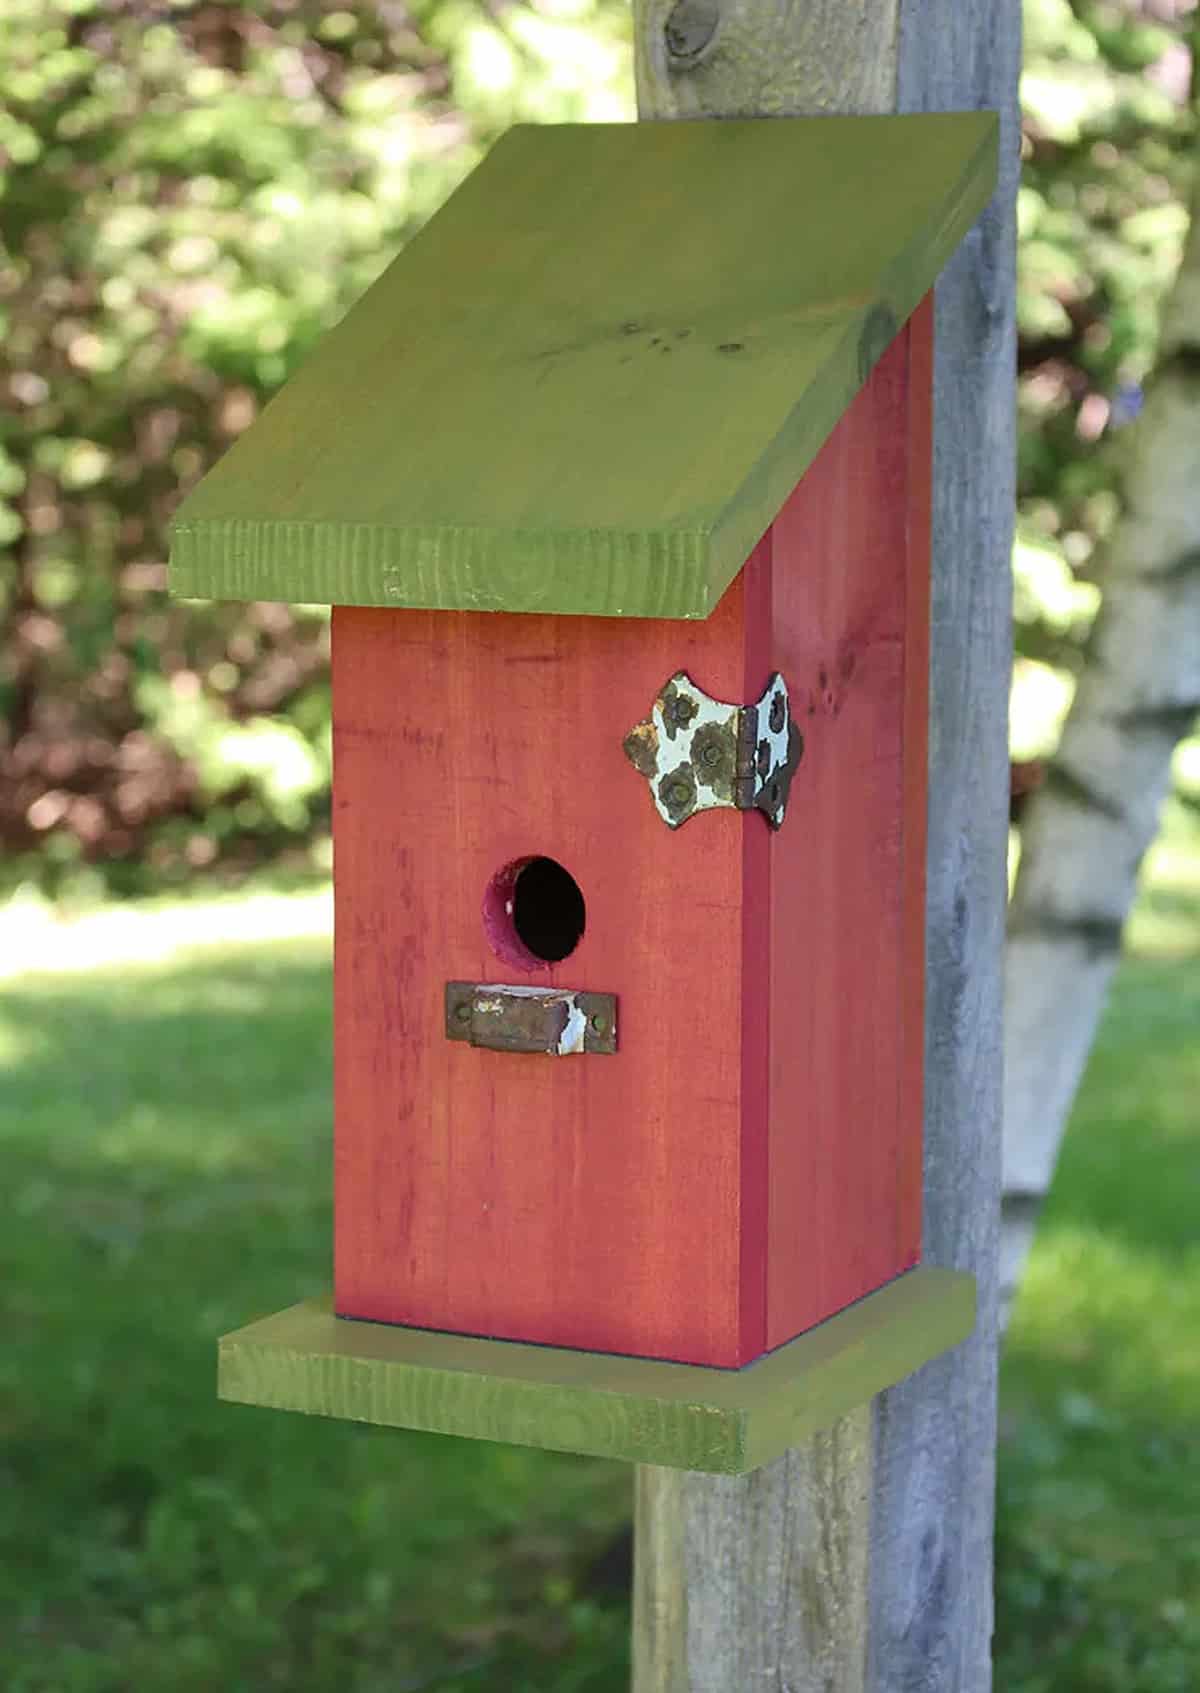 glue-less birdhouse hanging on wooden pole